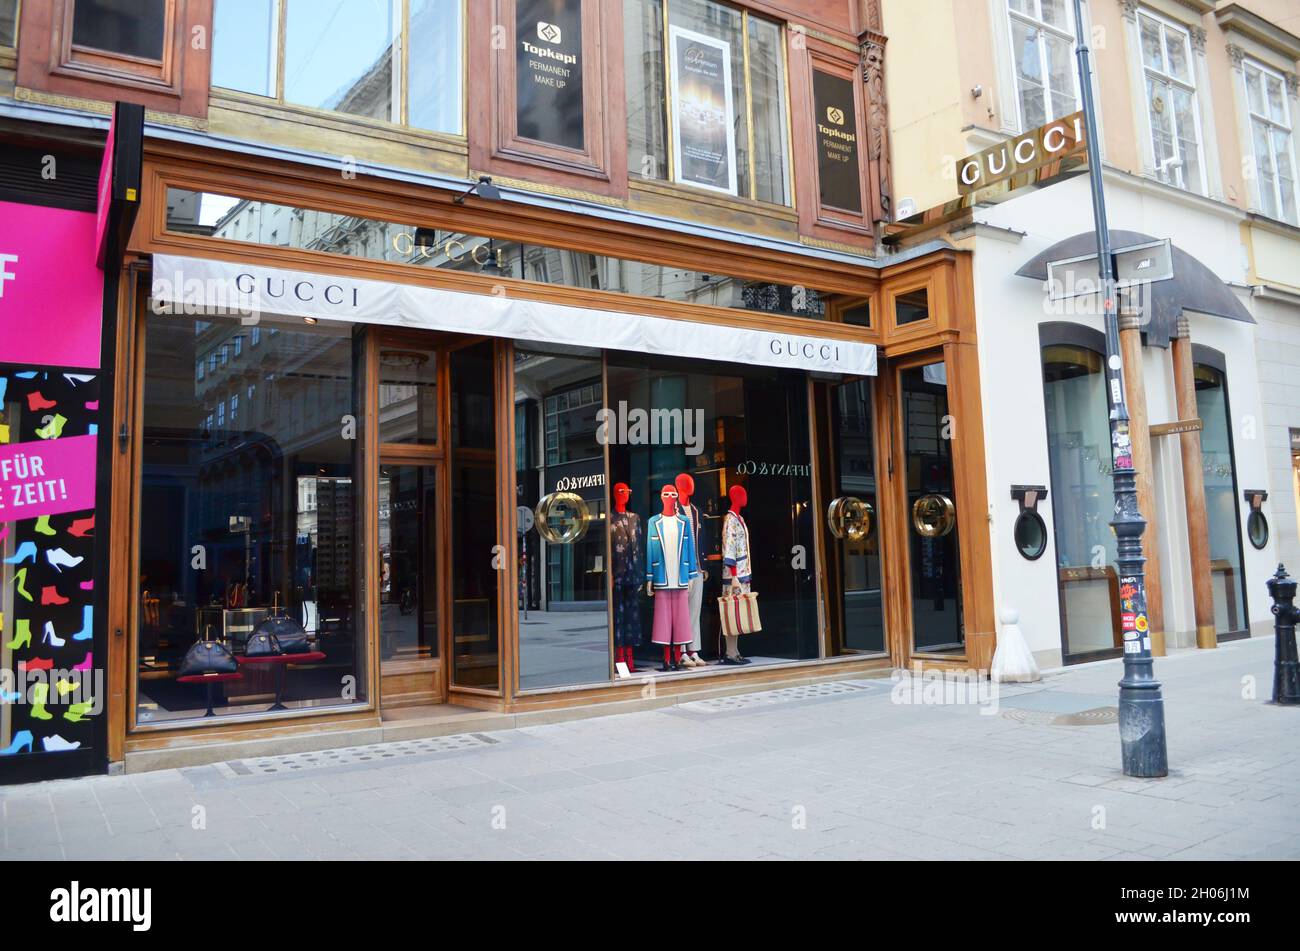 Page 14 - Clothes Shop Street Facade High Resolution Stock Photography and  Images - Alamy